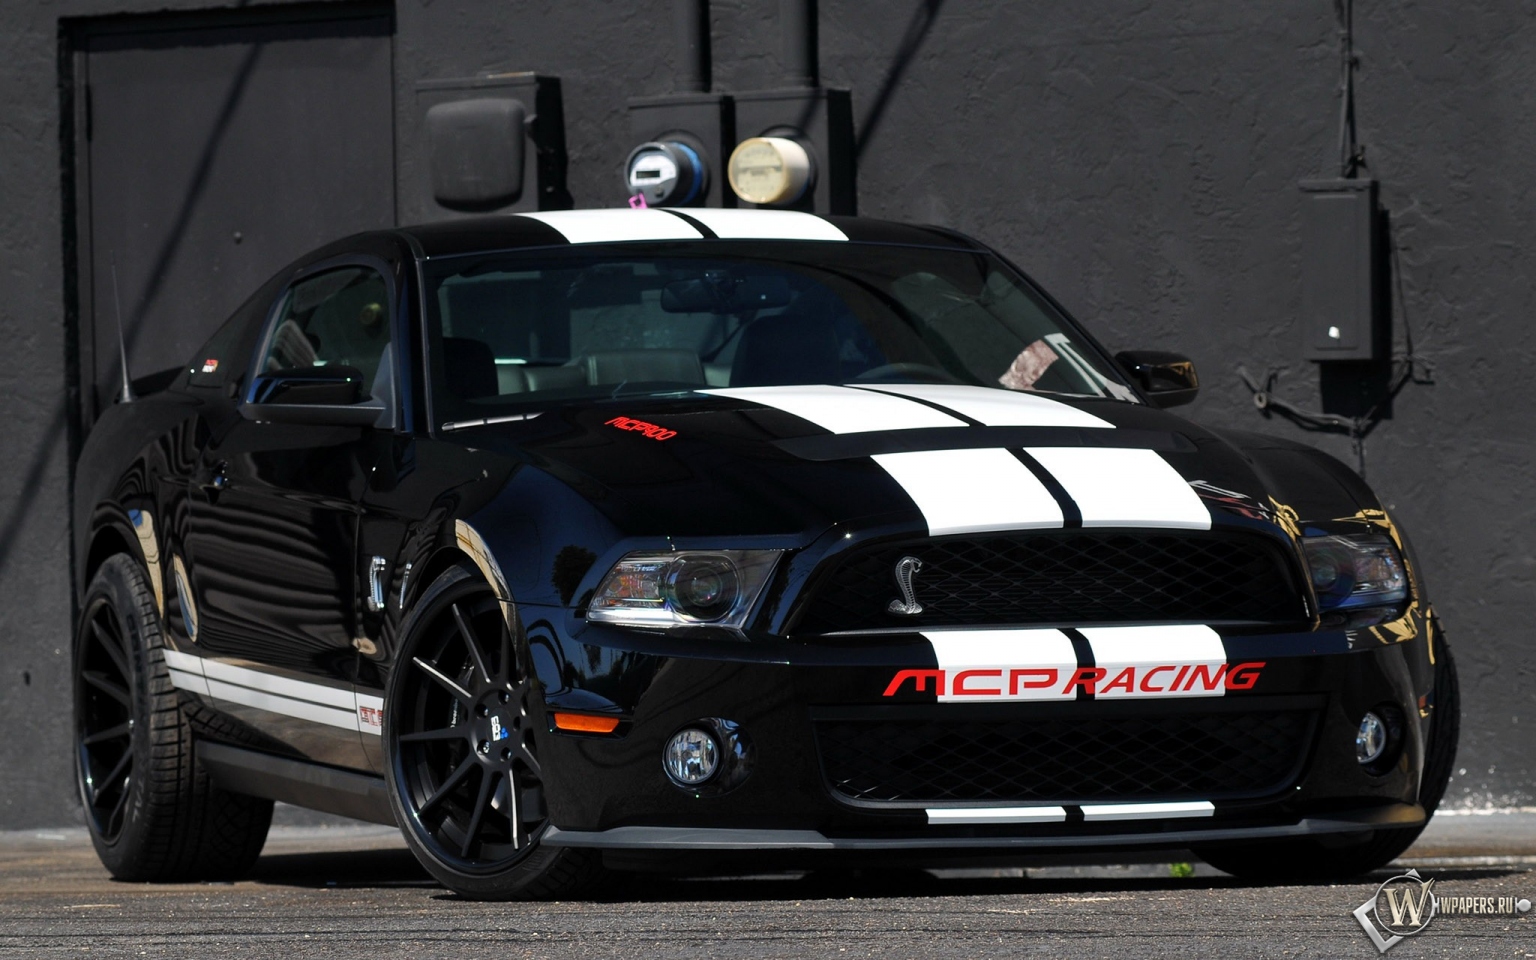 2012 Ford Mustang Sports 1536x960